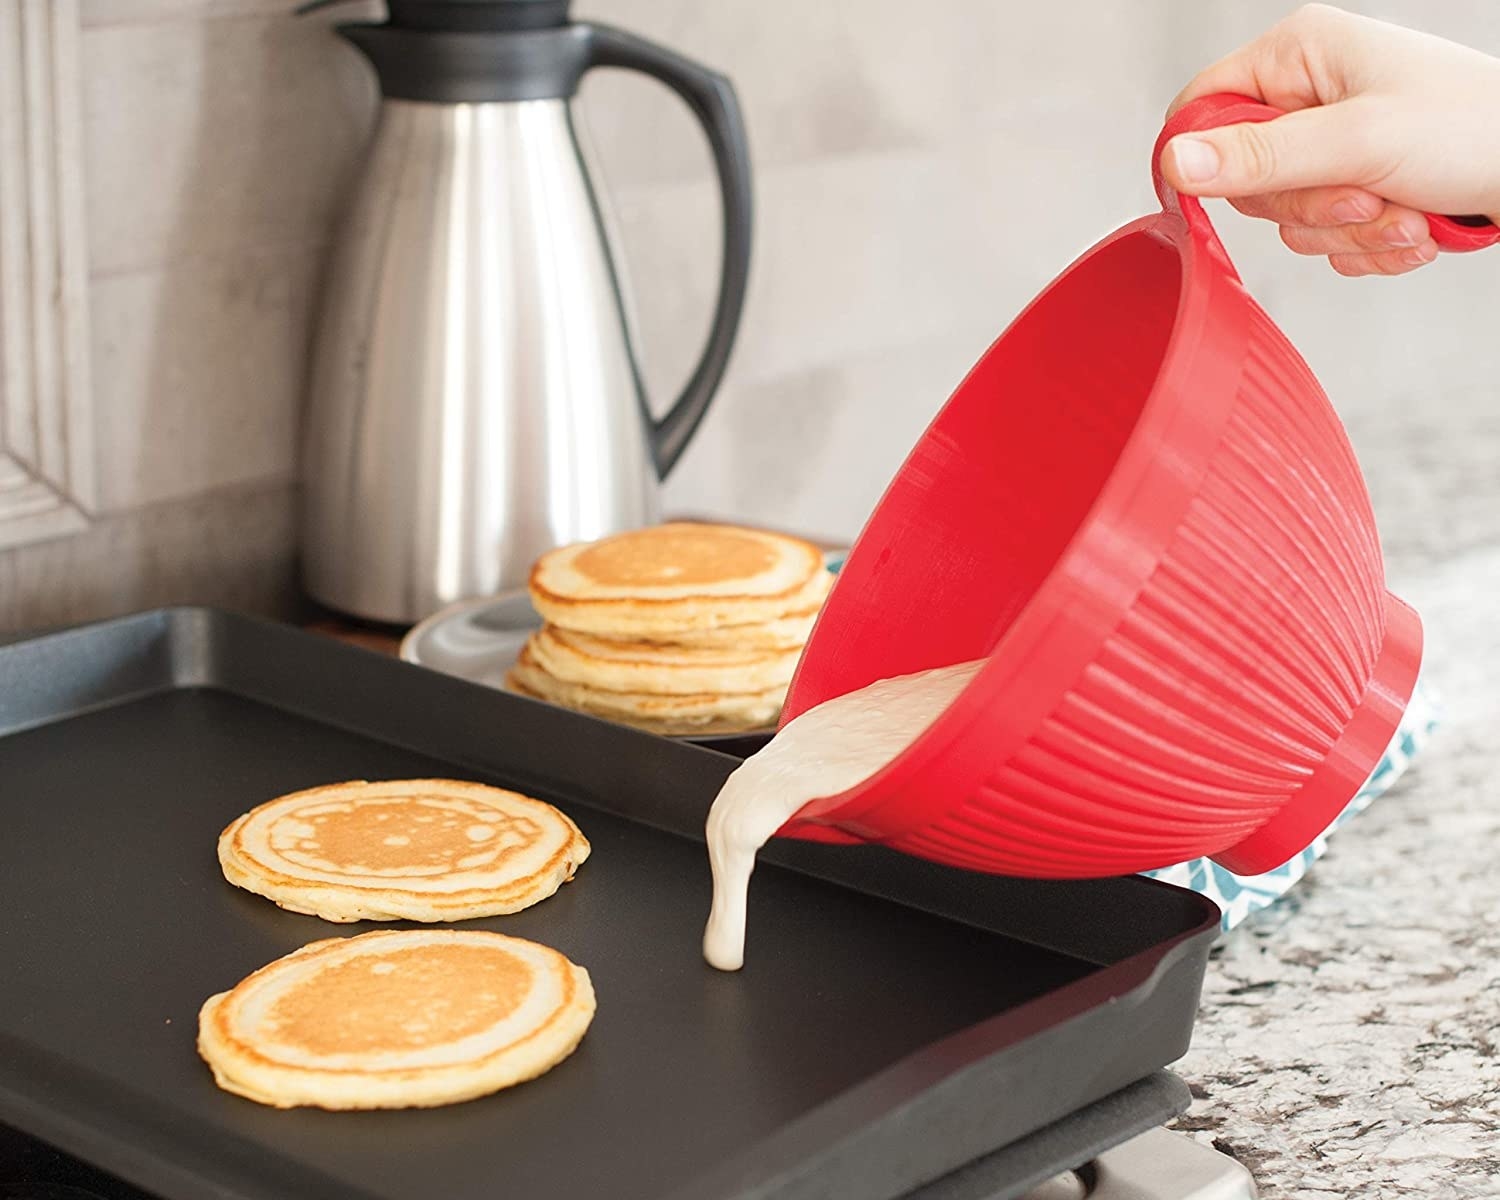 A person poring pancake batter from the bowl onto a griddle